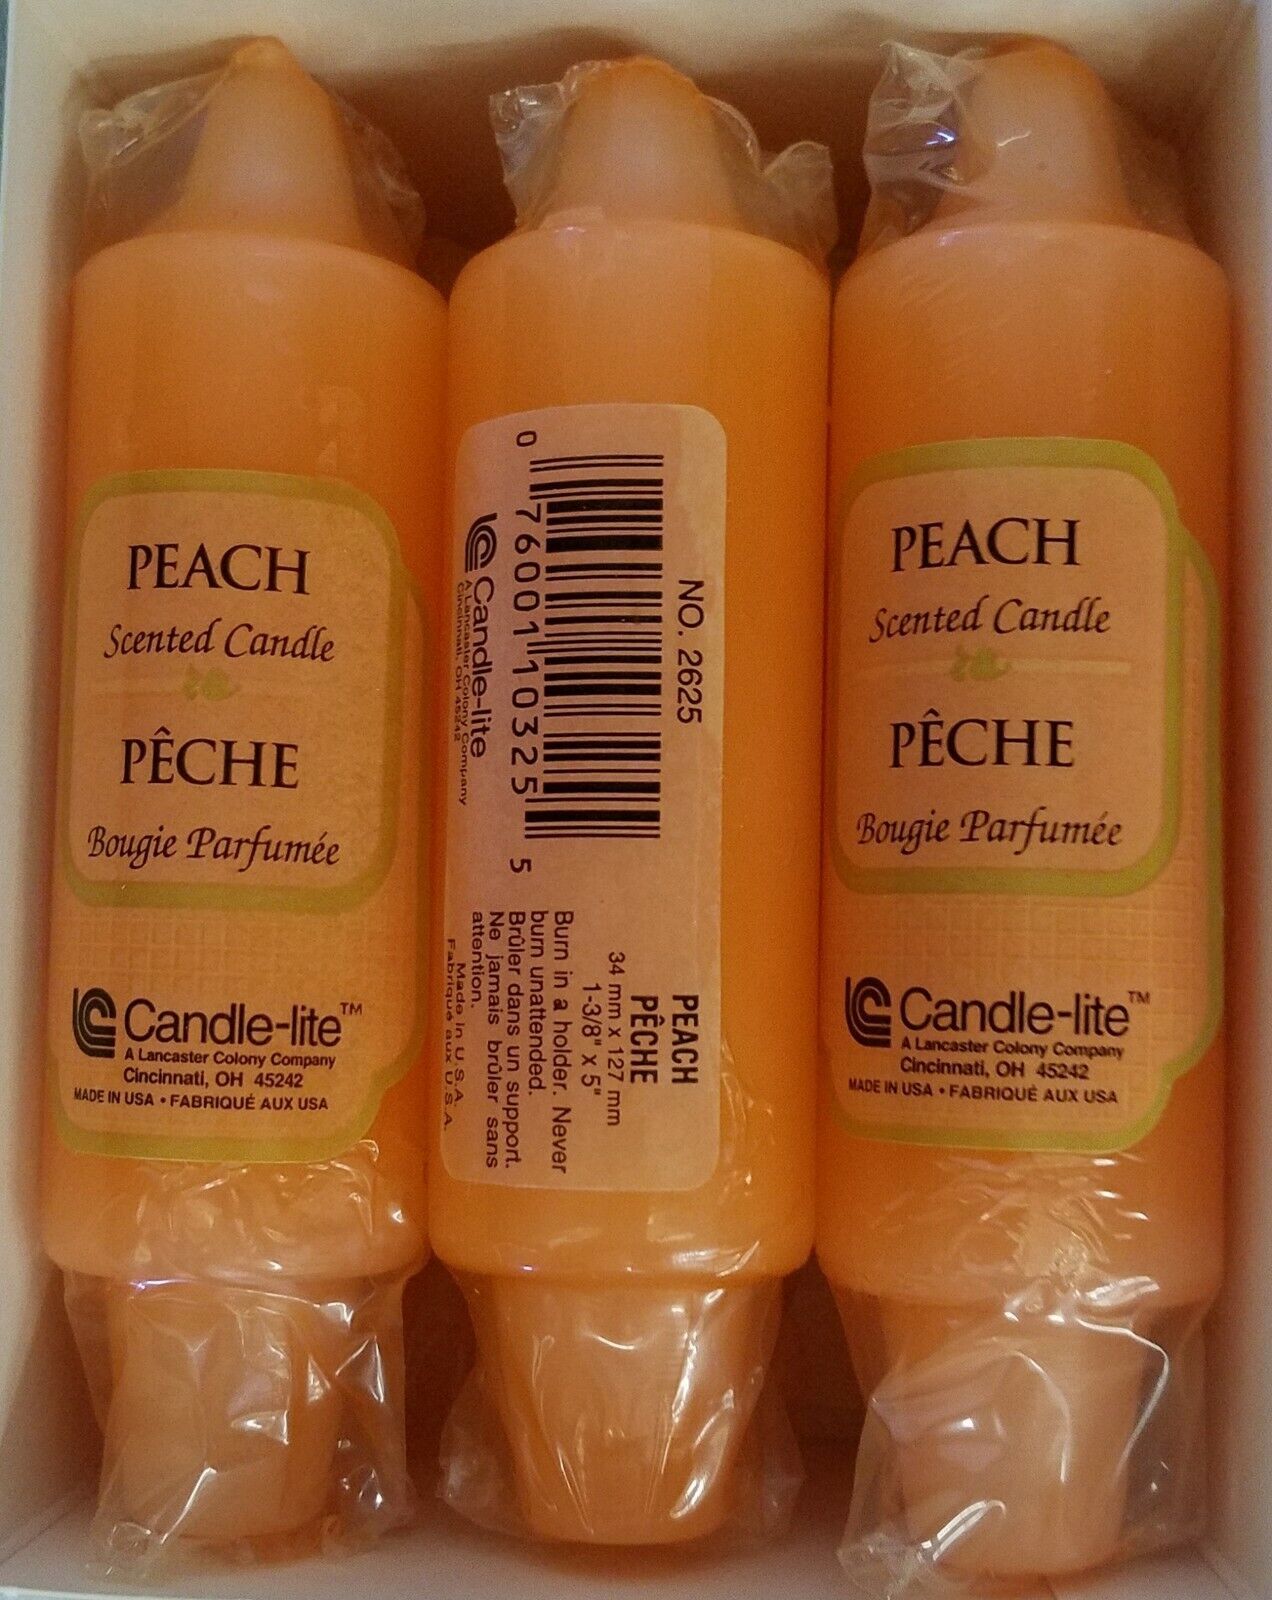 Colony Candle-lite 5" Carriage Candles Boxed Set of 6 Peach (Peach Scent) - $11.21